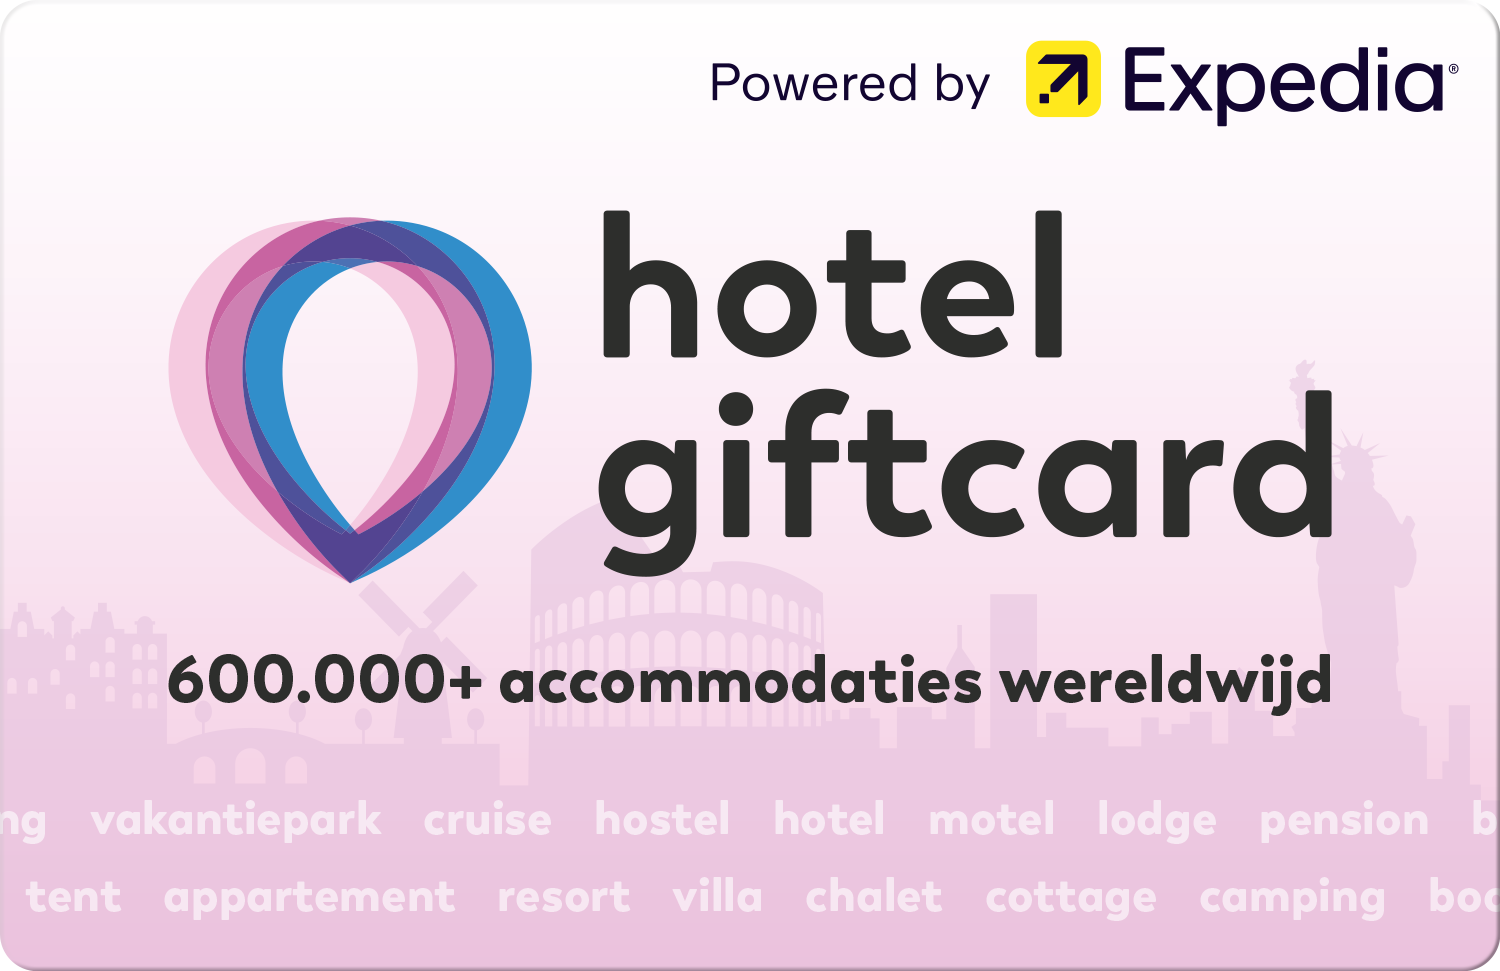 HotelGiftcard.com